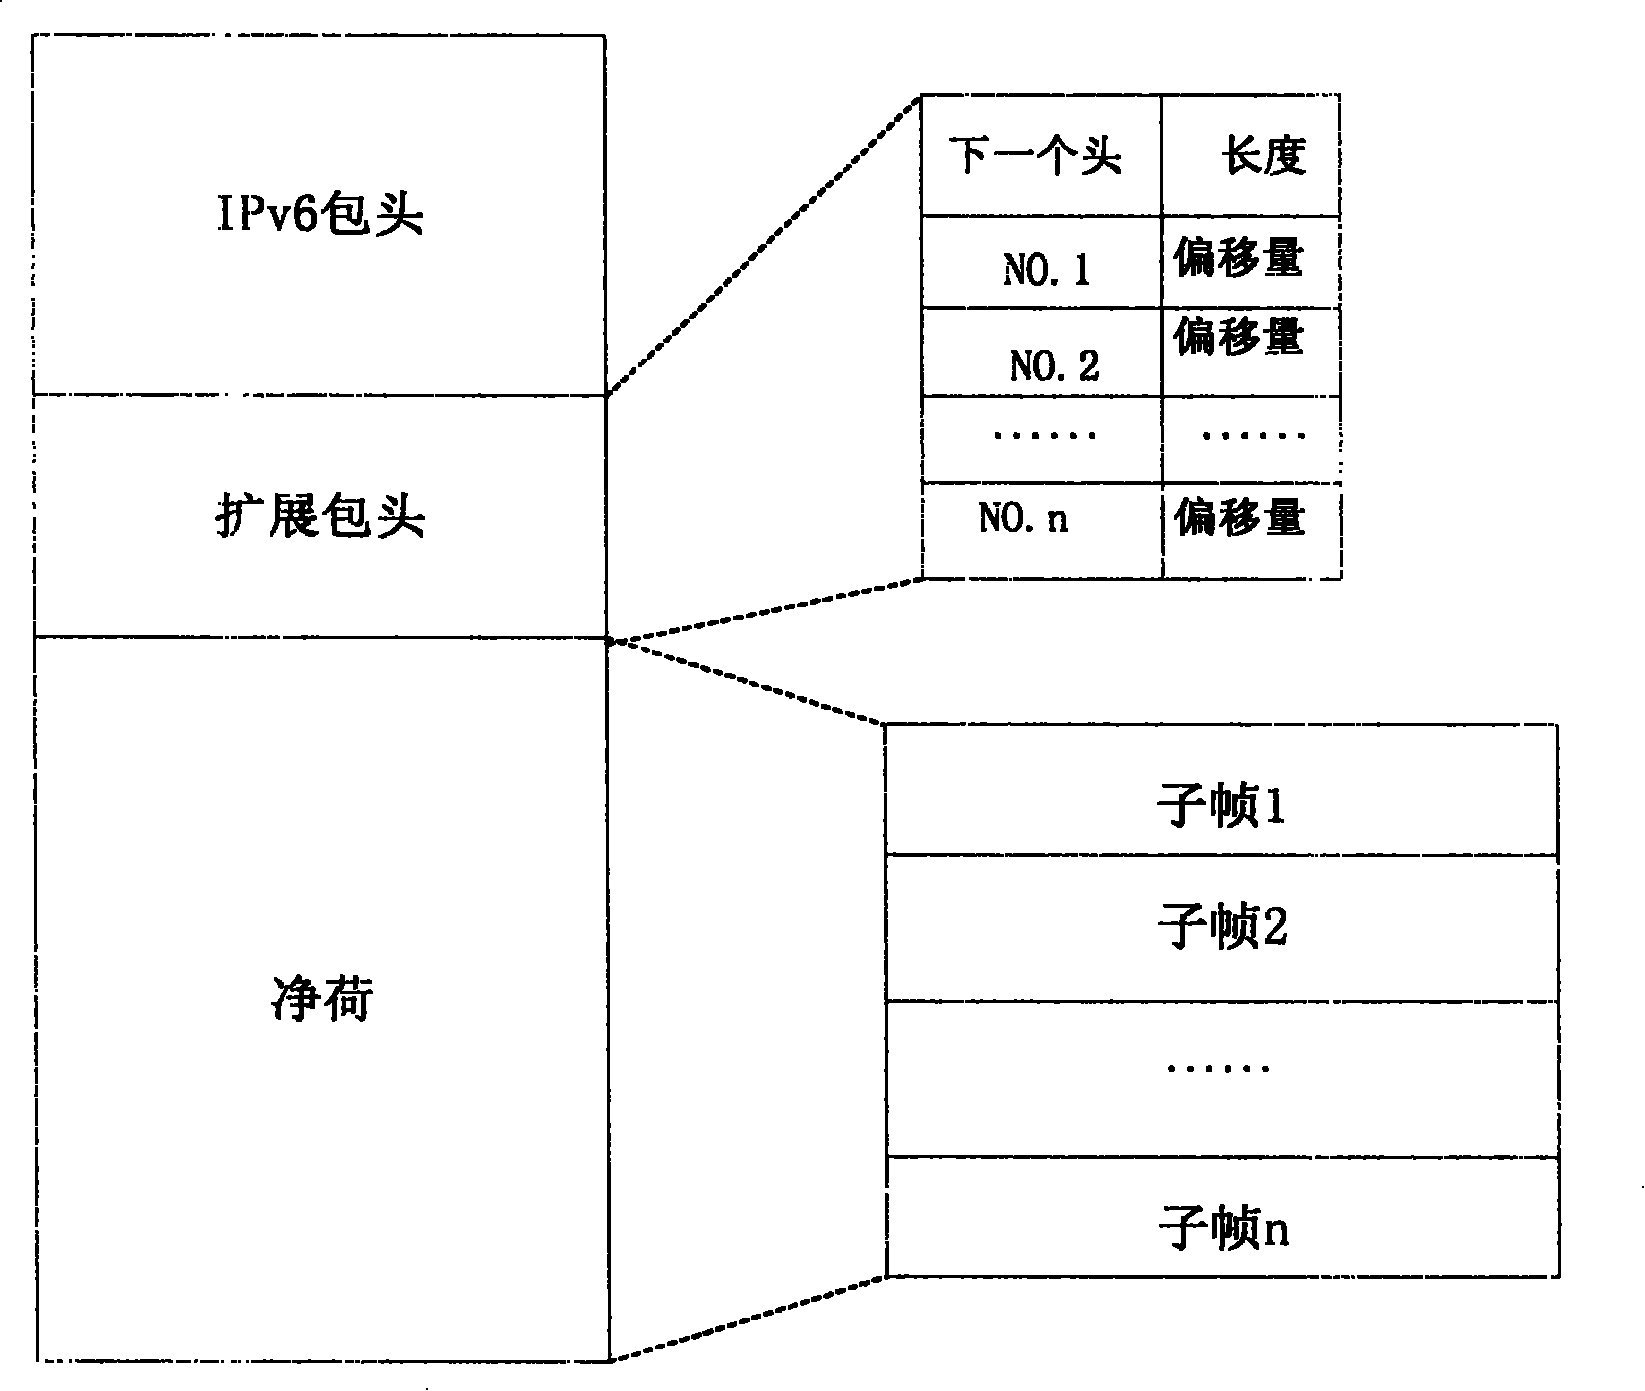 A data transmission method and device